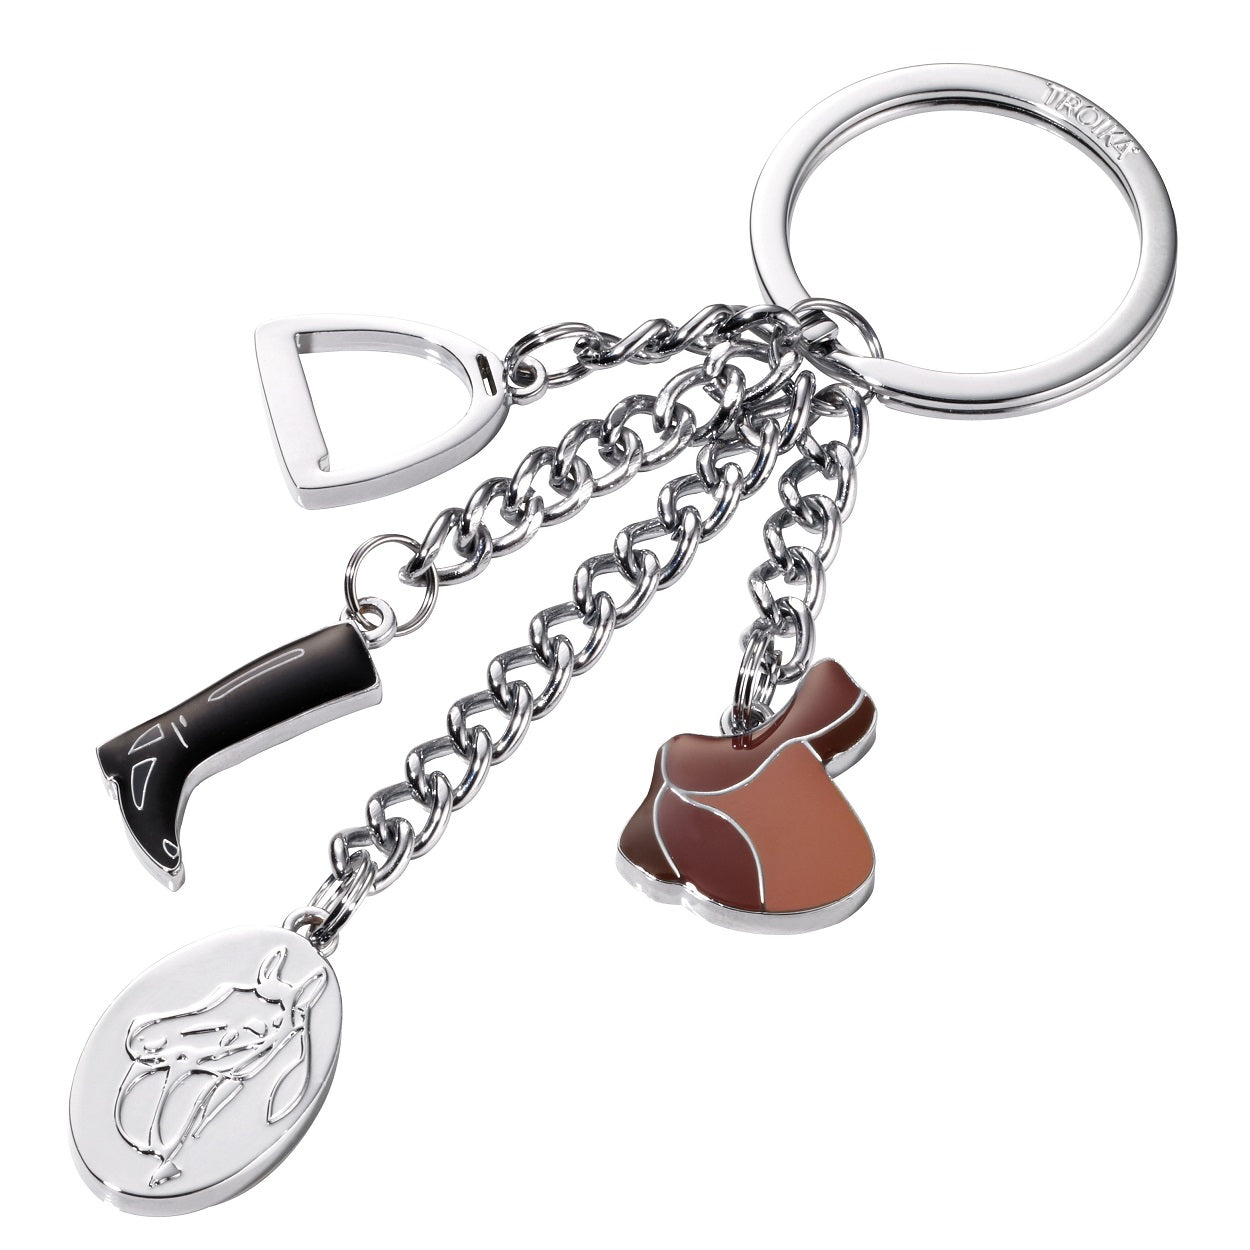 TROIKA Keyring with 4 Charms LUCKY HORSE PFERDEGLUCK